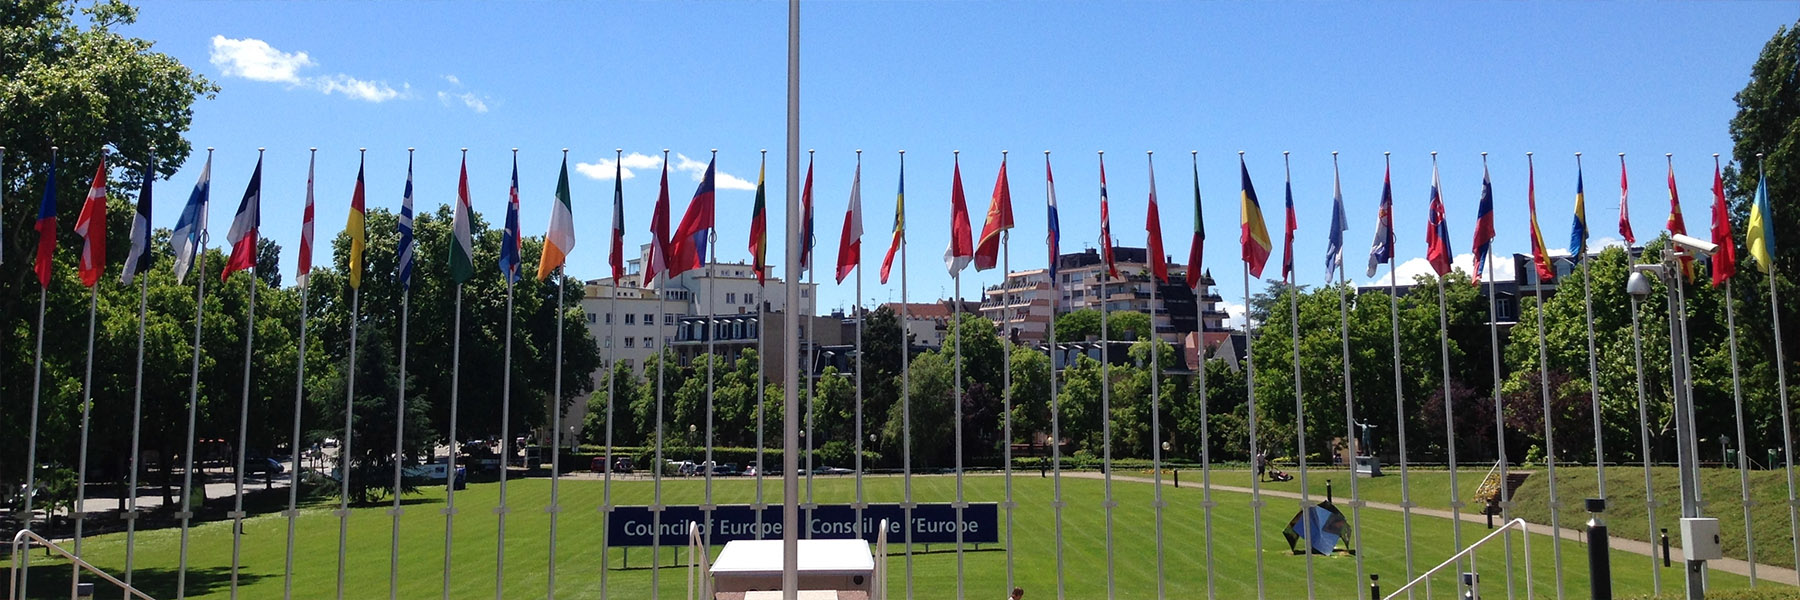 Landscape of a row of flags at a study abroad location.